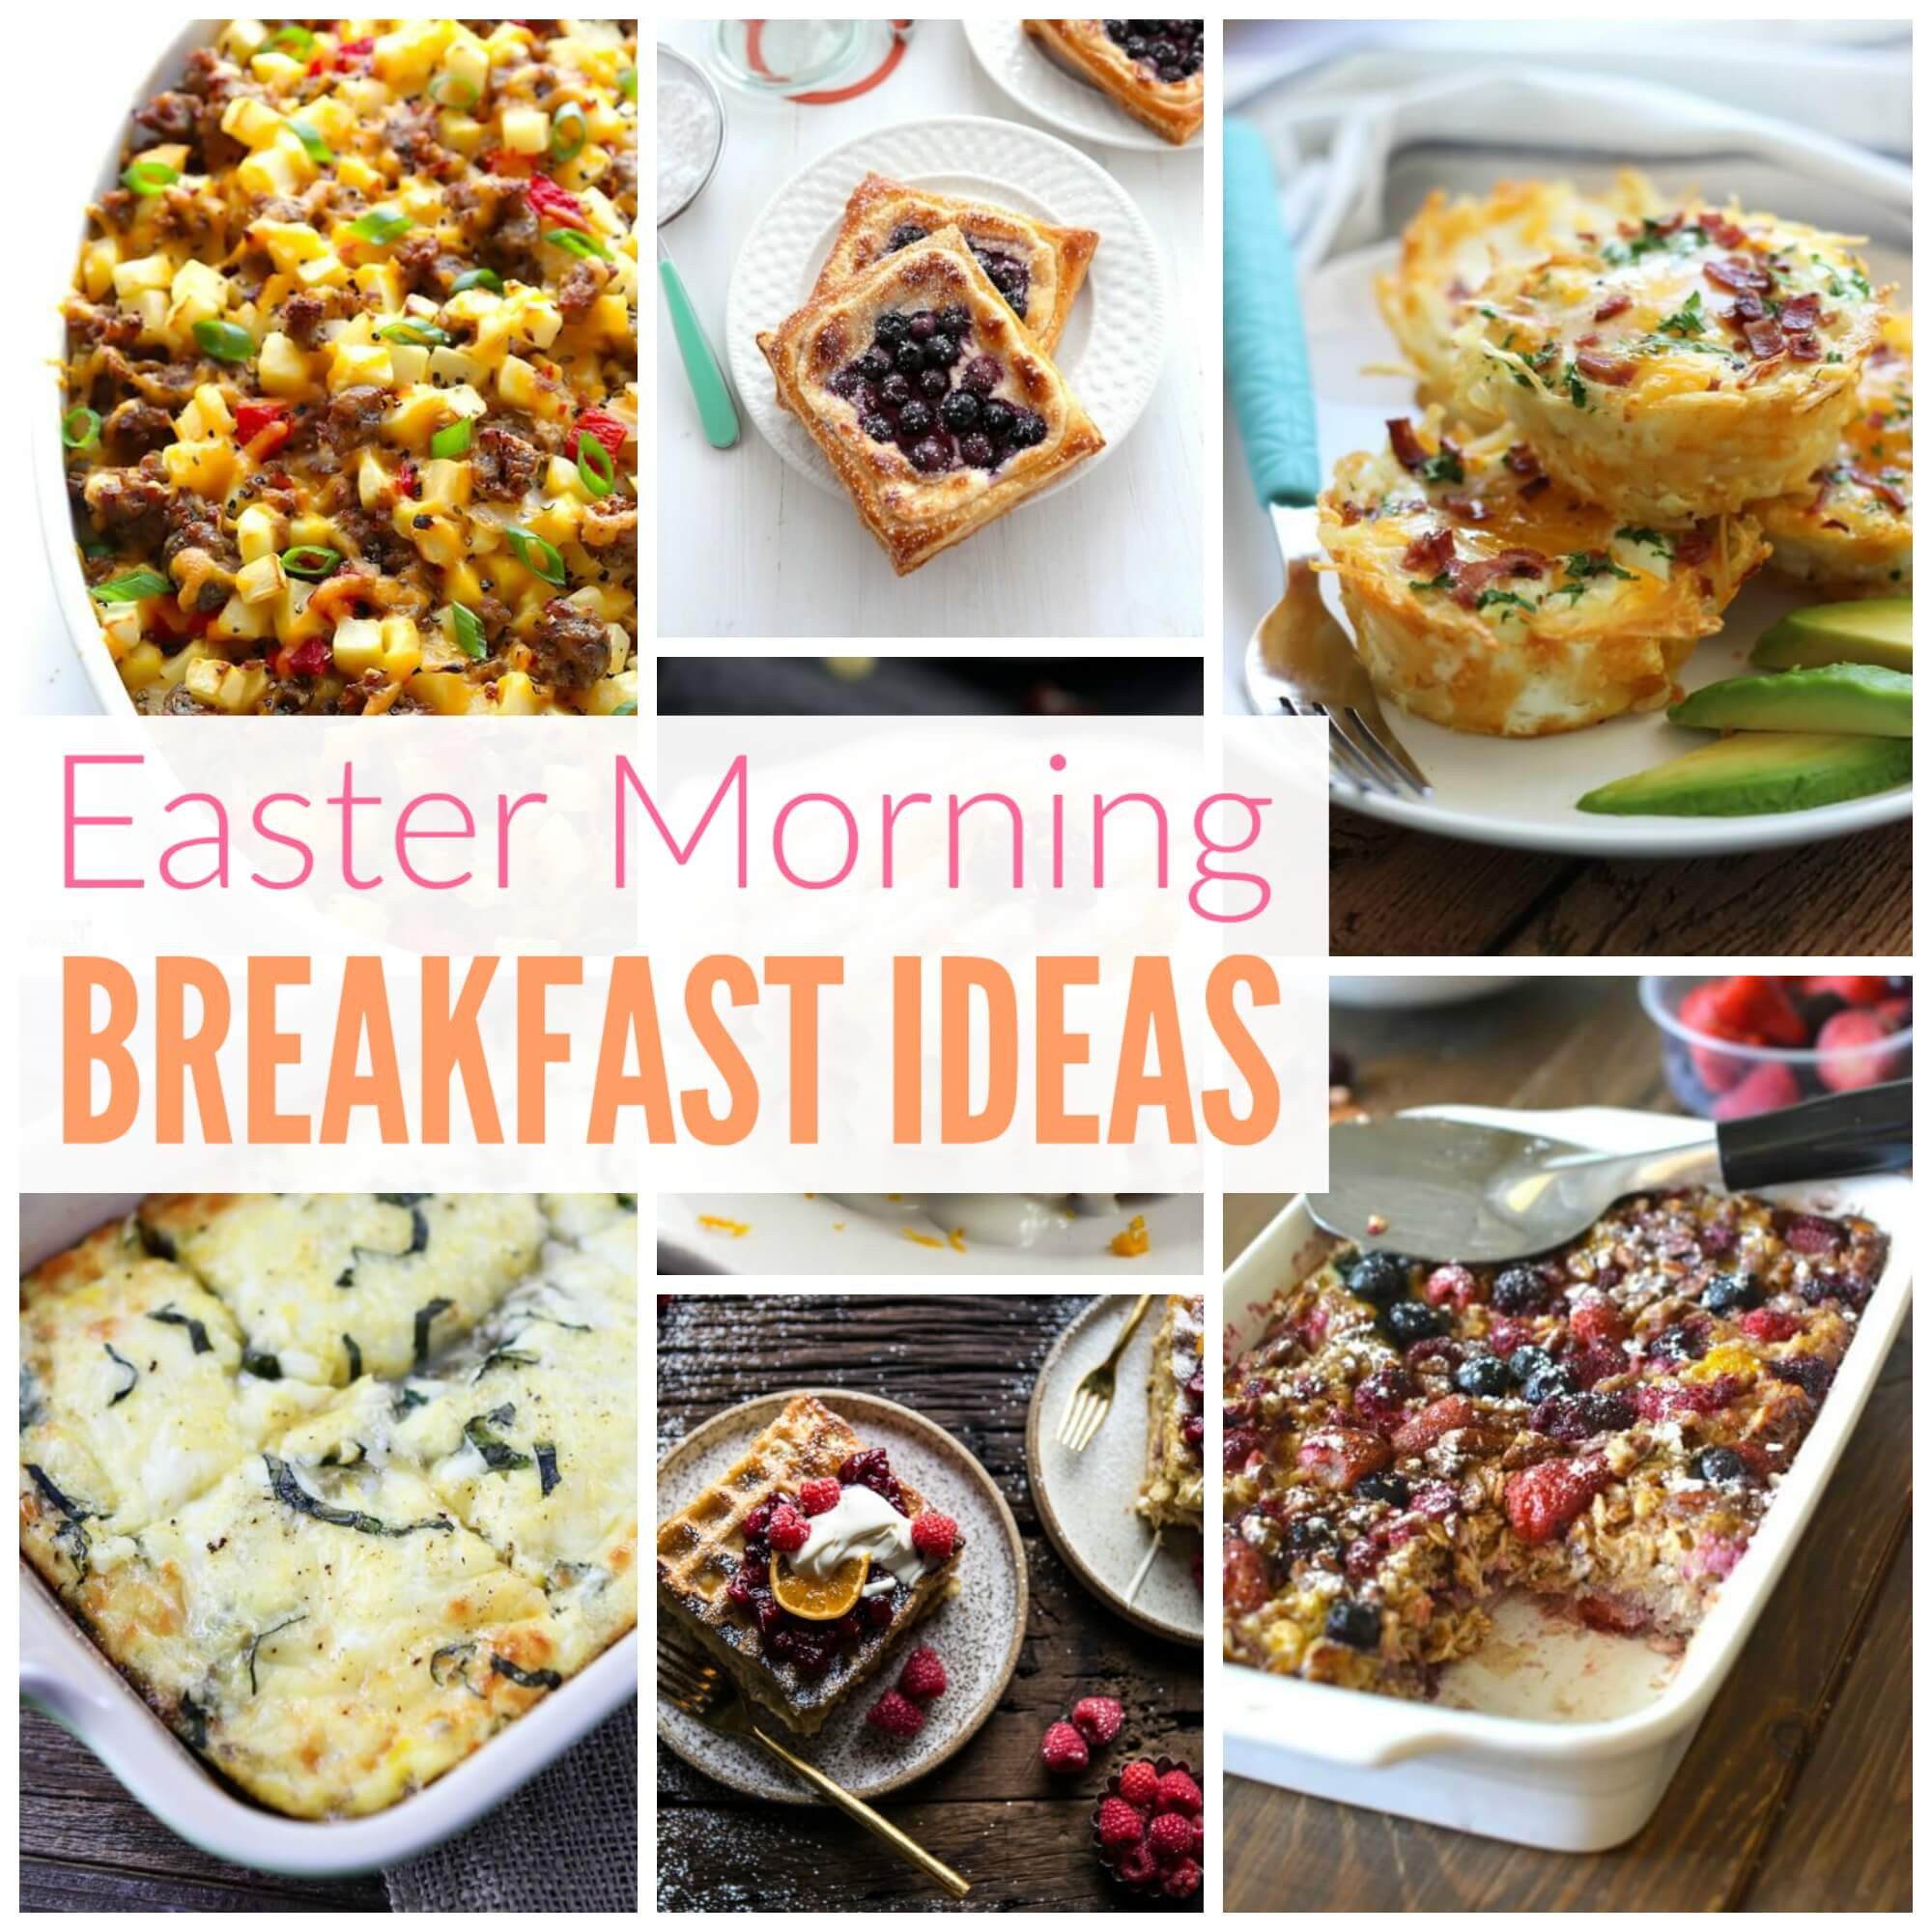 Easter Breakfast Recipes
 Easter Breakfast Ideas and Brunch Recipes